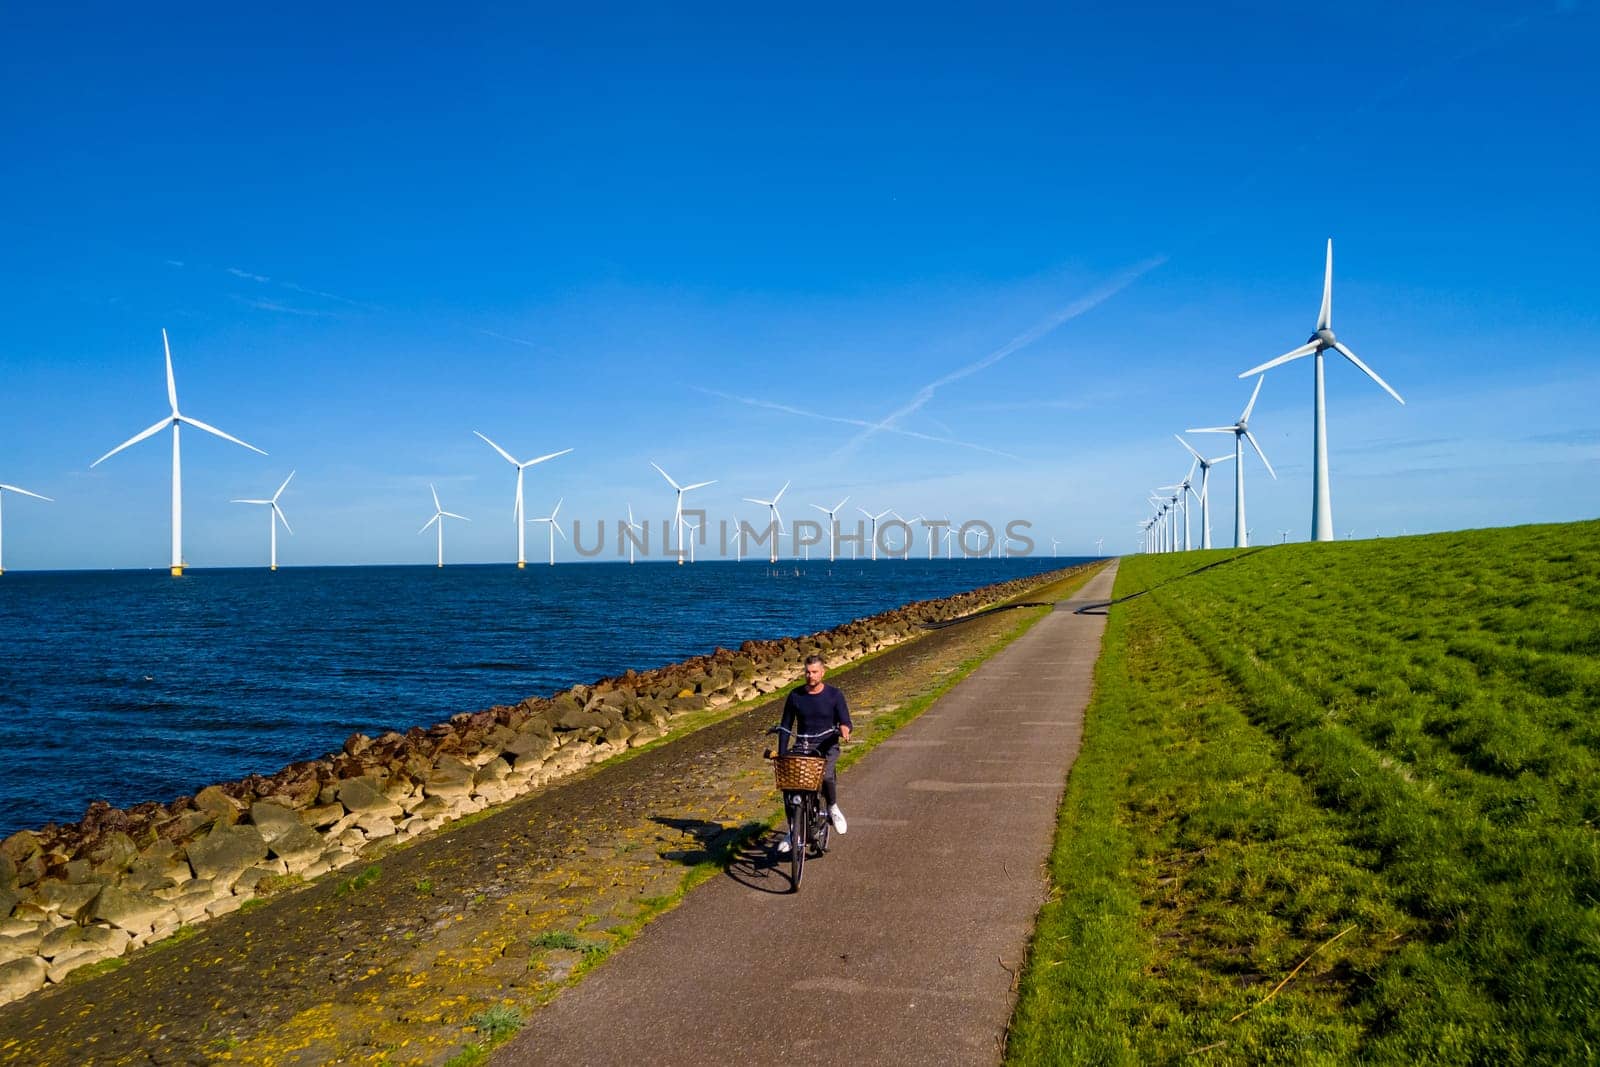 A man energetically cycling down a path lined with wind turbines in the Netherlands by fokkebok